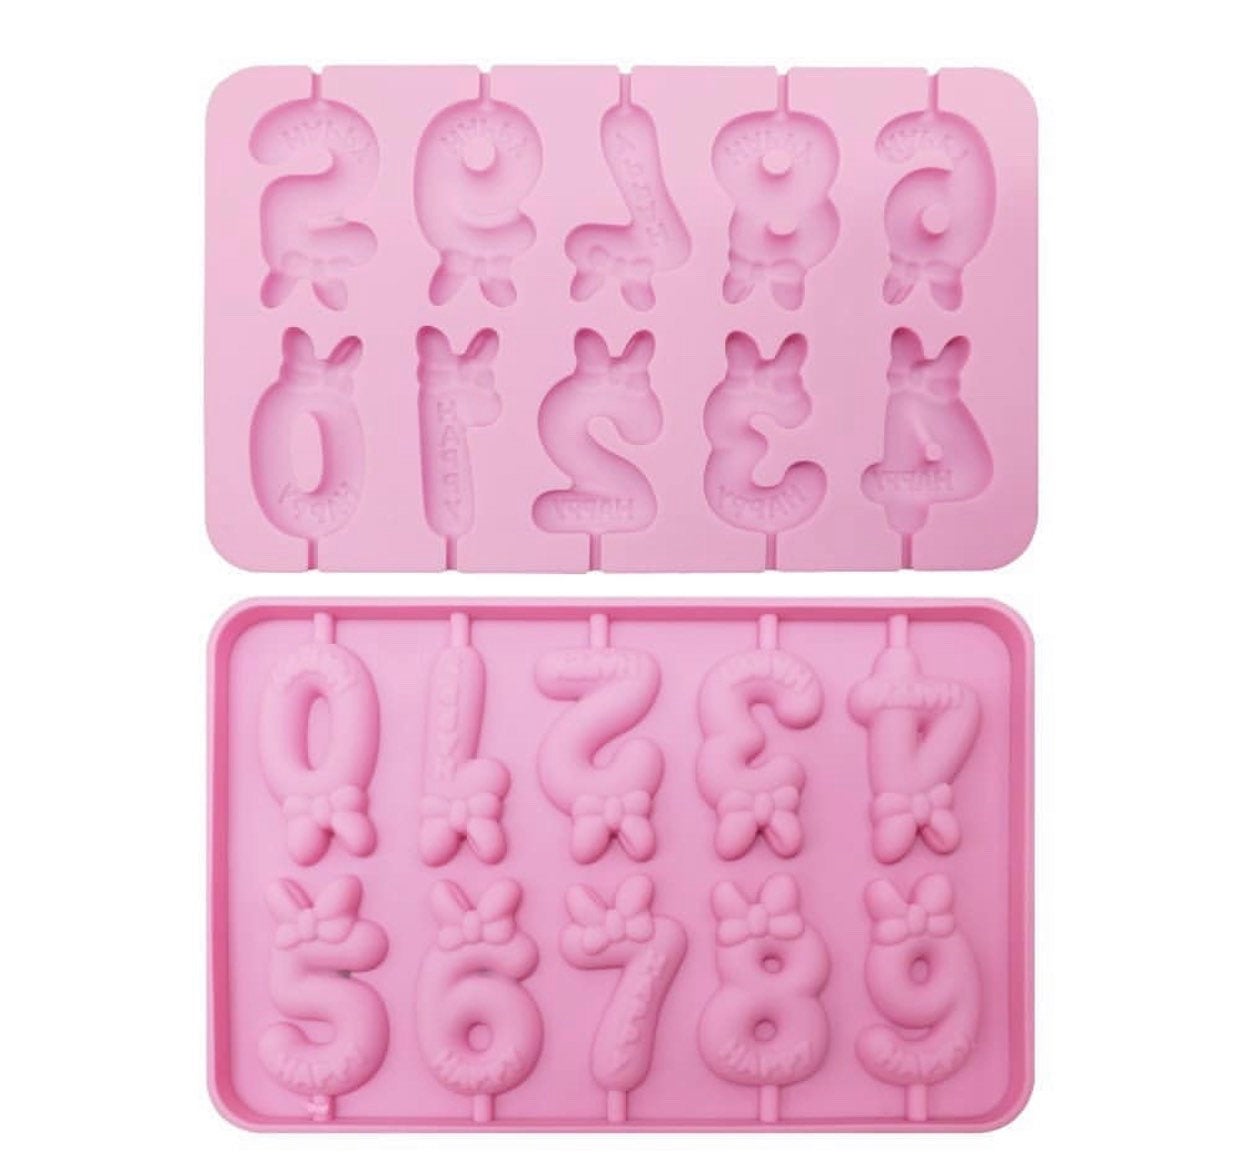 Bow Number Silicone Lollipop Mold